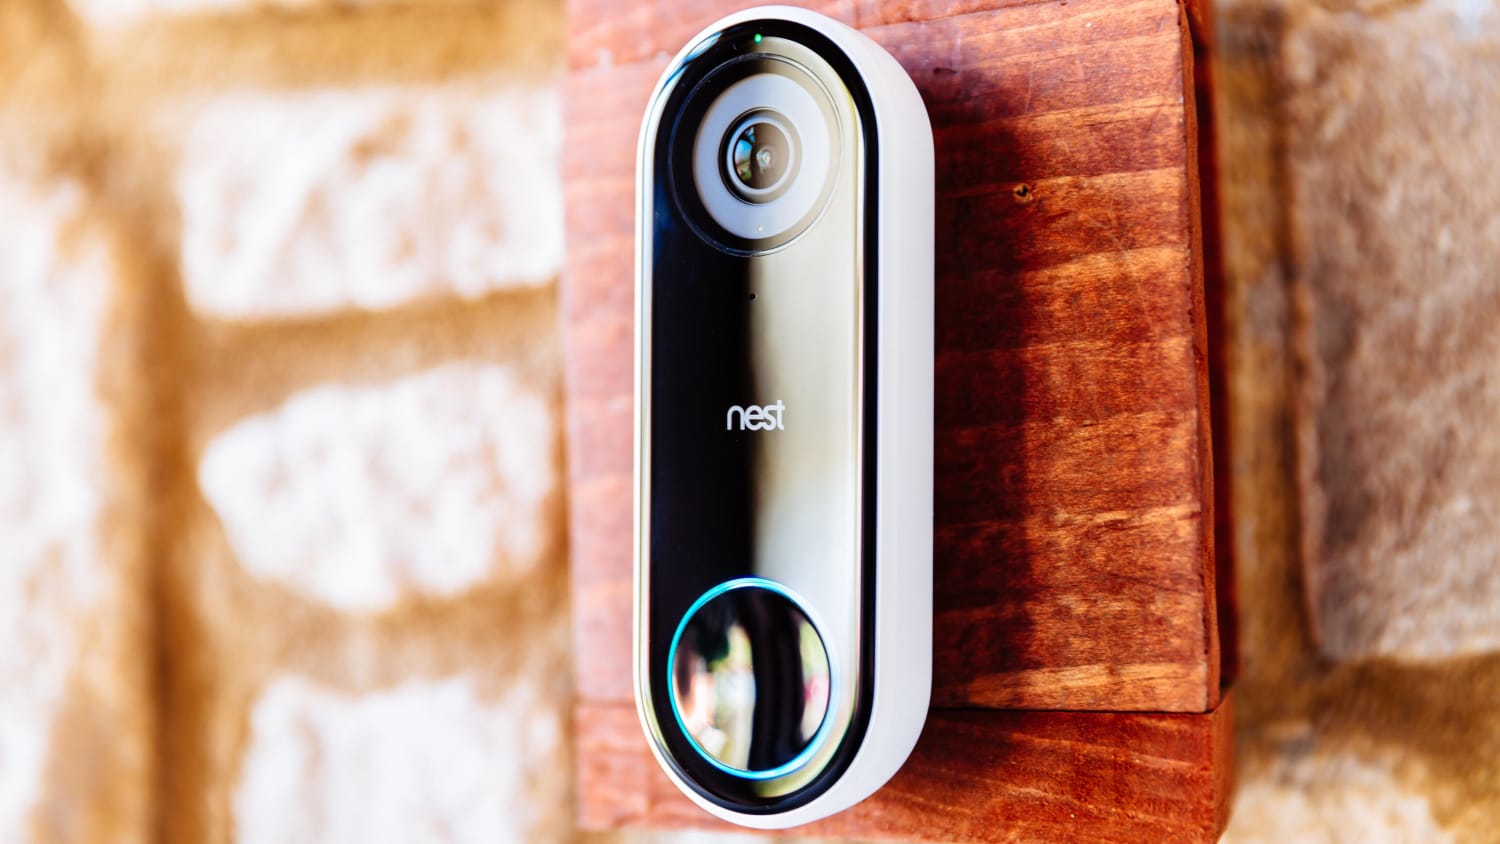 Waiting for a package? The Nest Hello can tell you when it's delivered